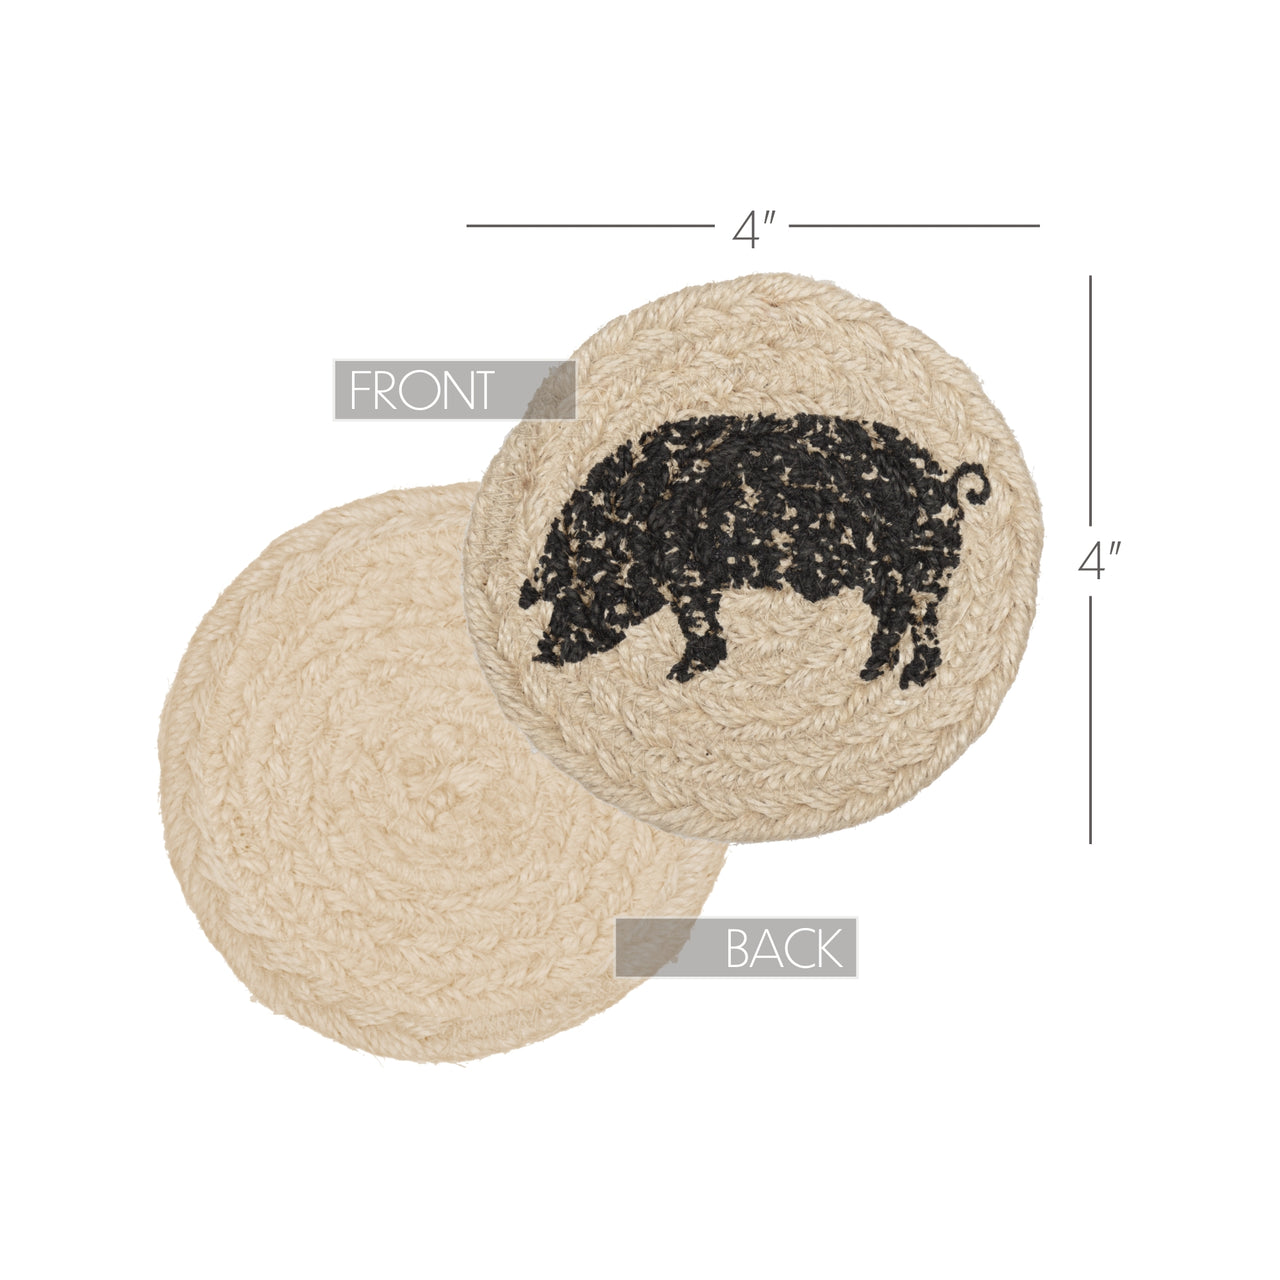 Sawyer Mill Charcoal Pig Jute Coaster Set of 6 VHC Brands